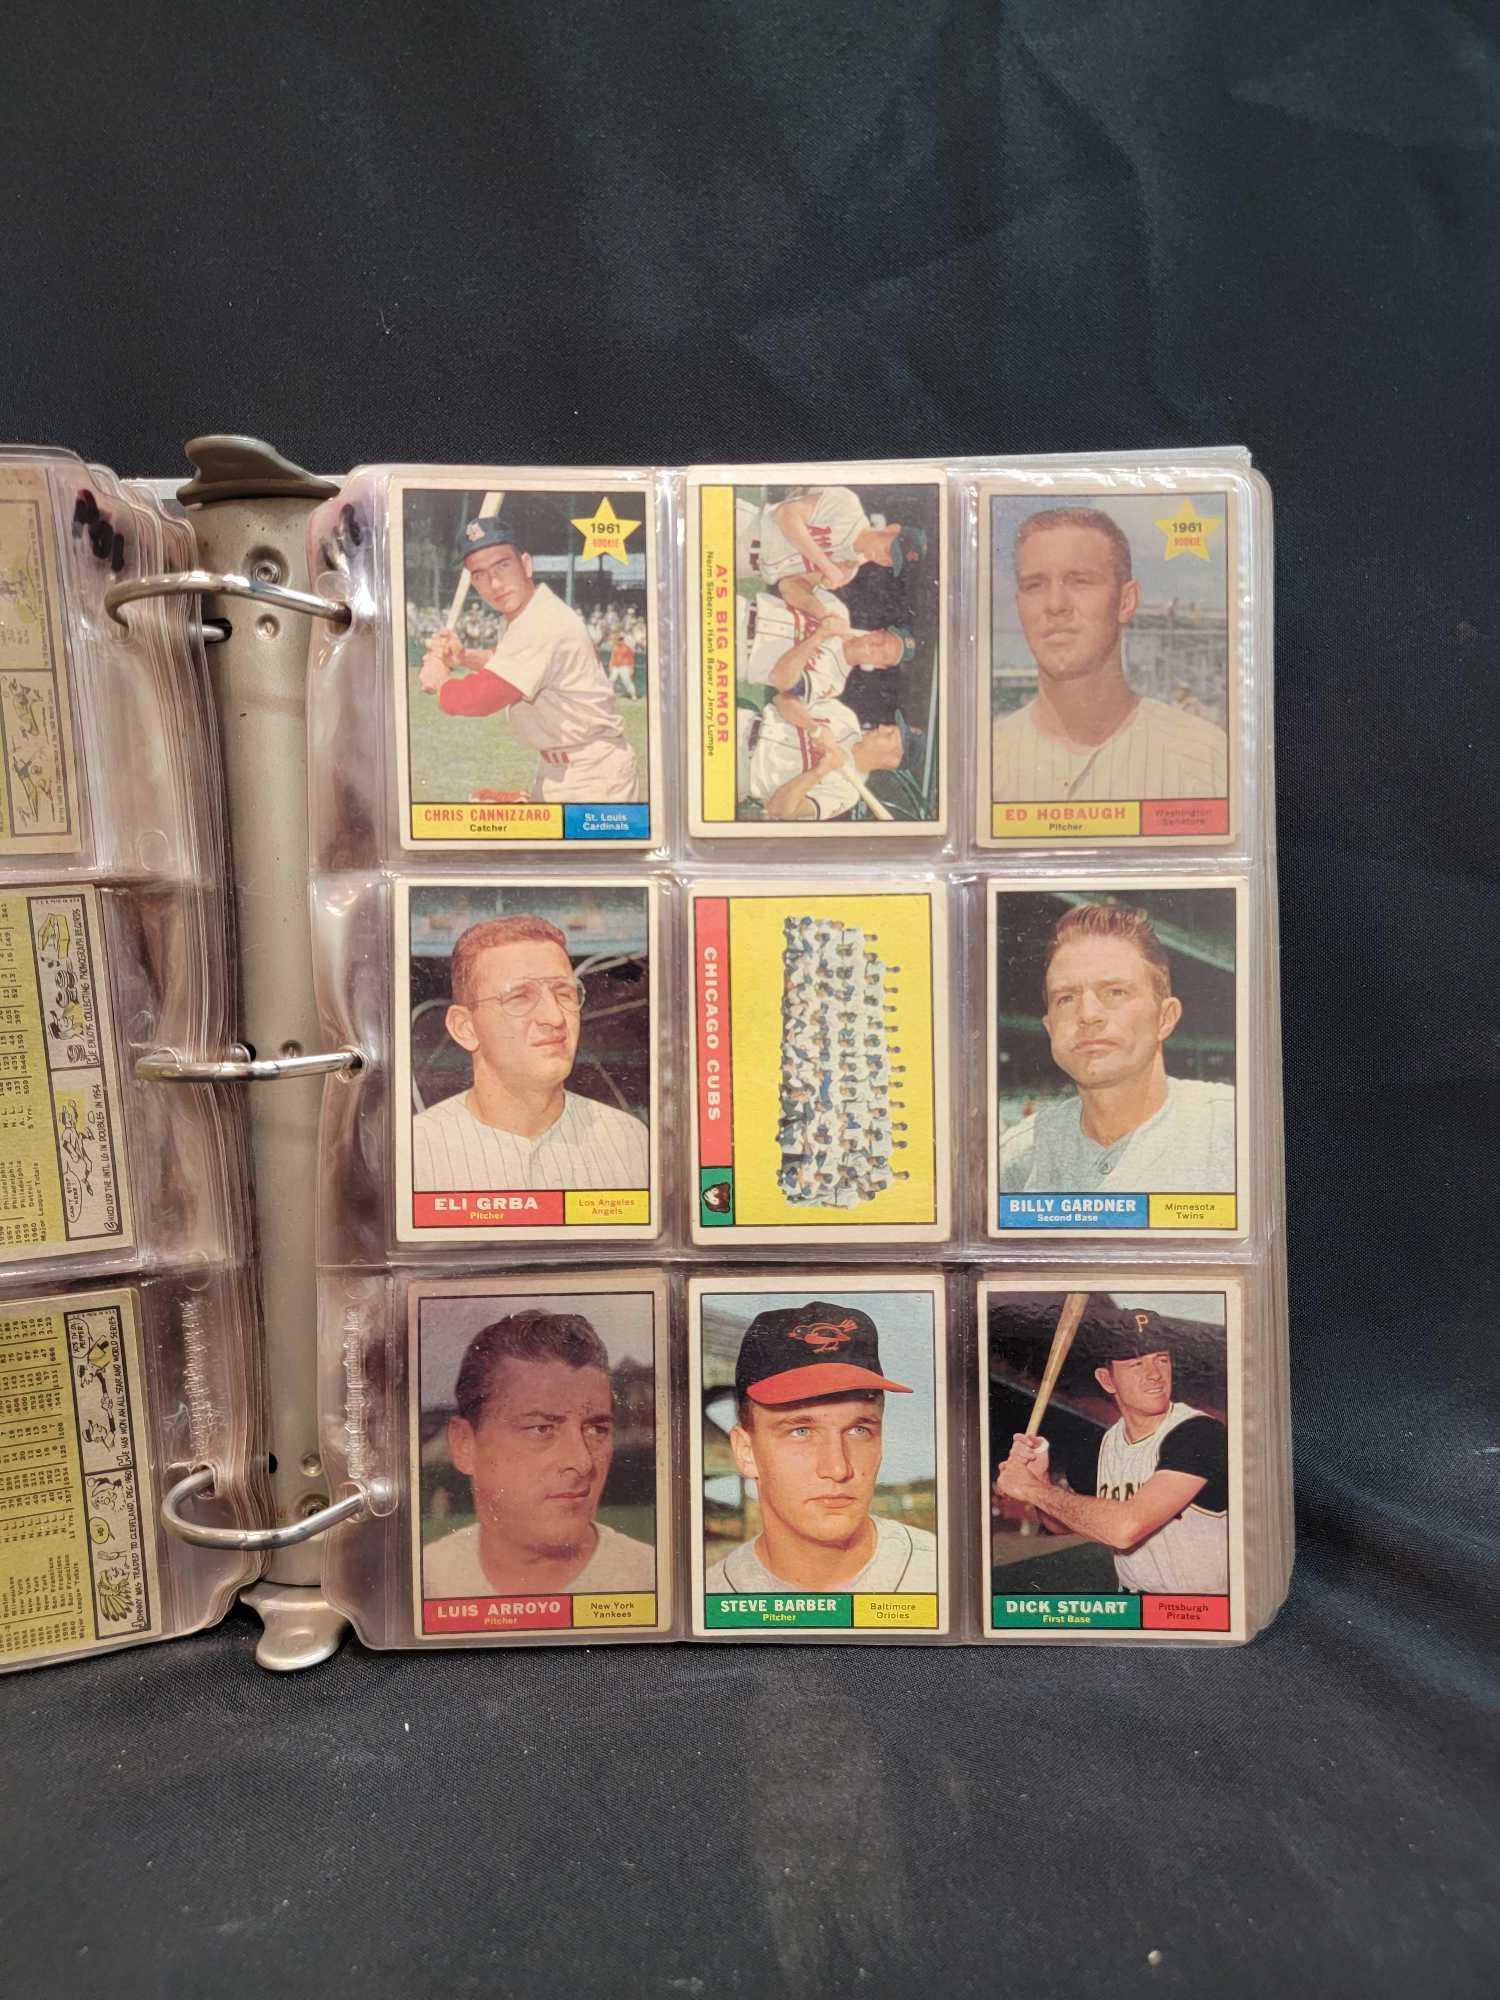 1961 Topps Baseball 310 different cards partial set HOFers Stars RCs more in binder